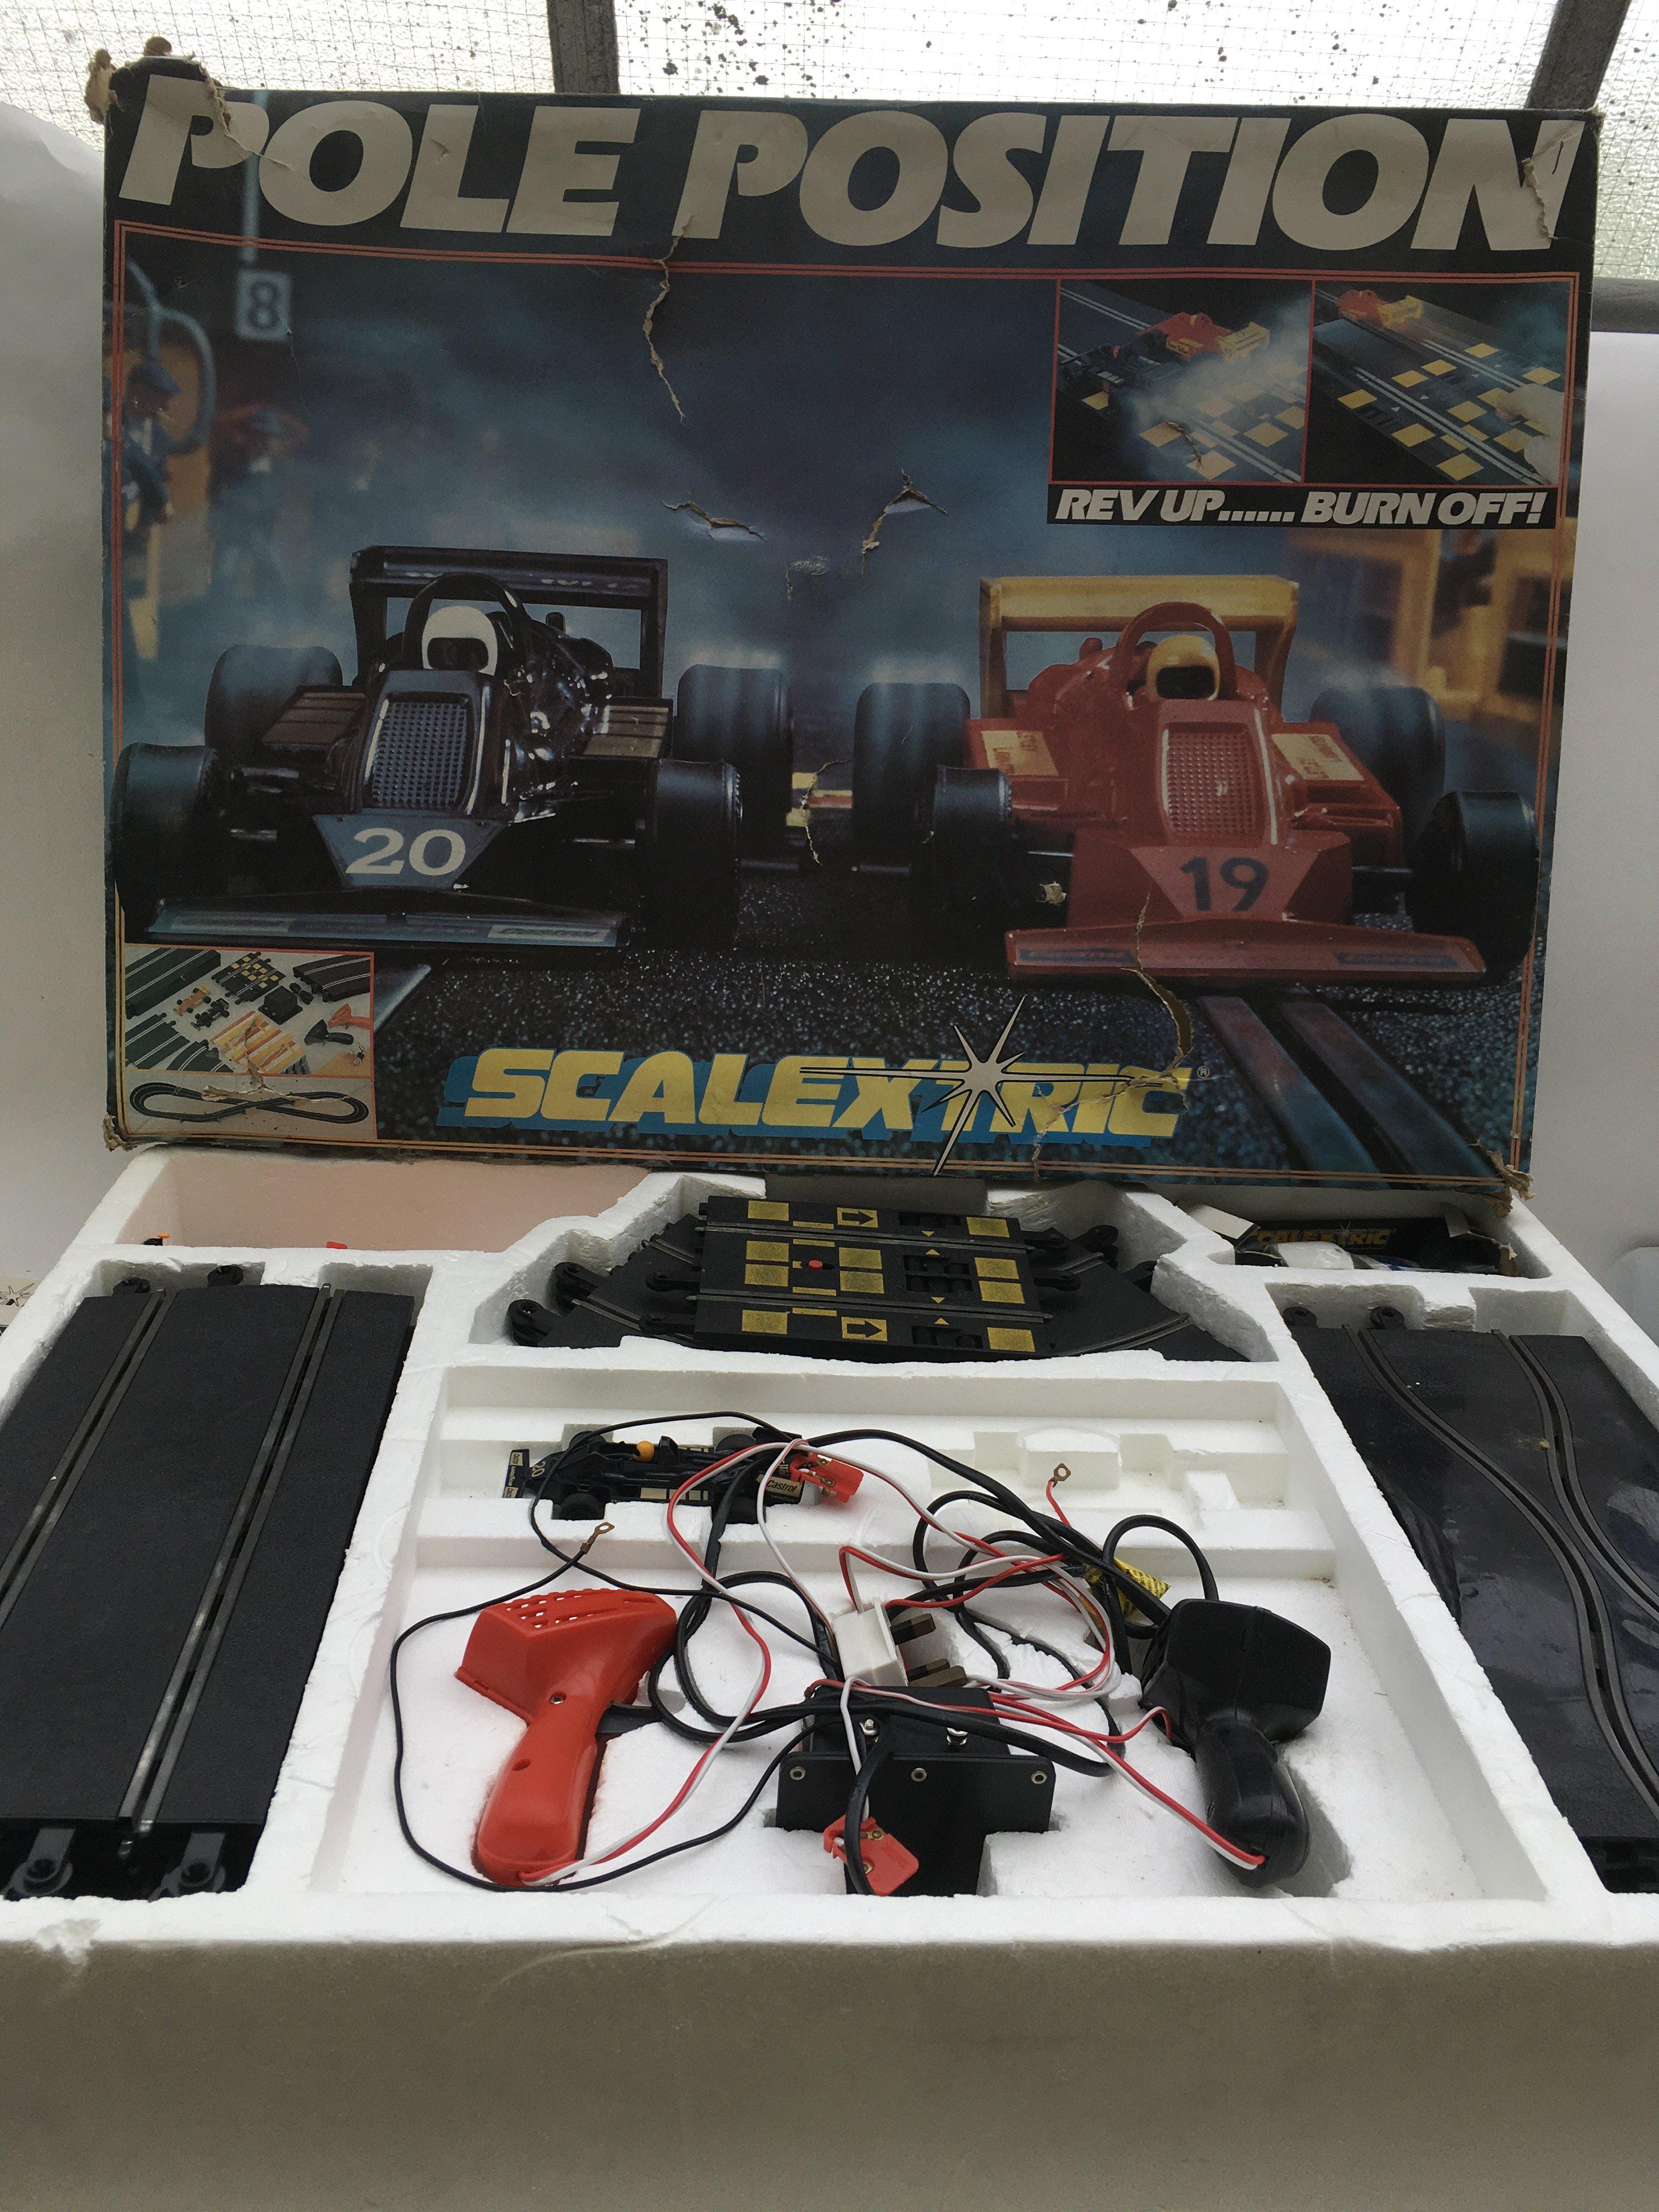 Scalextric, Pole position, boxed